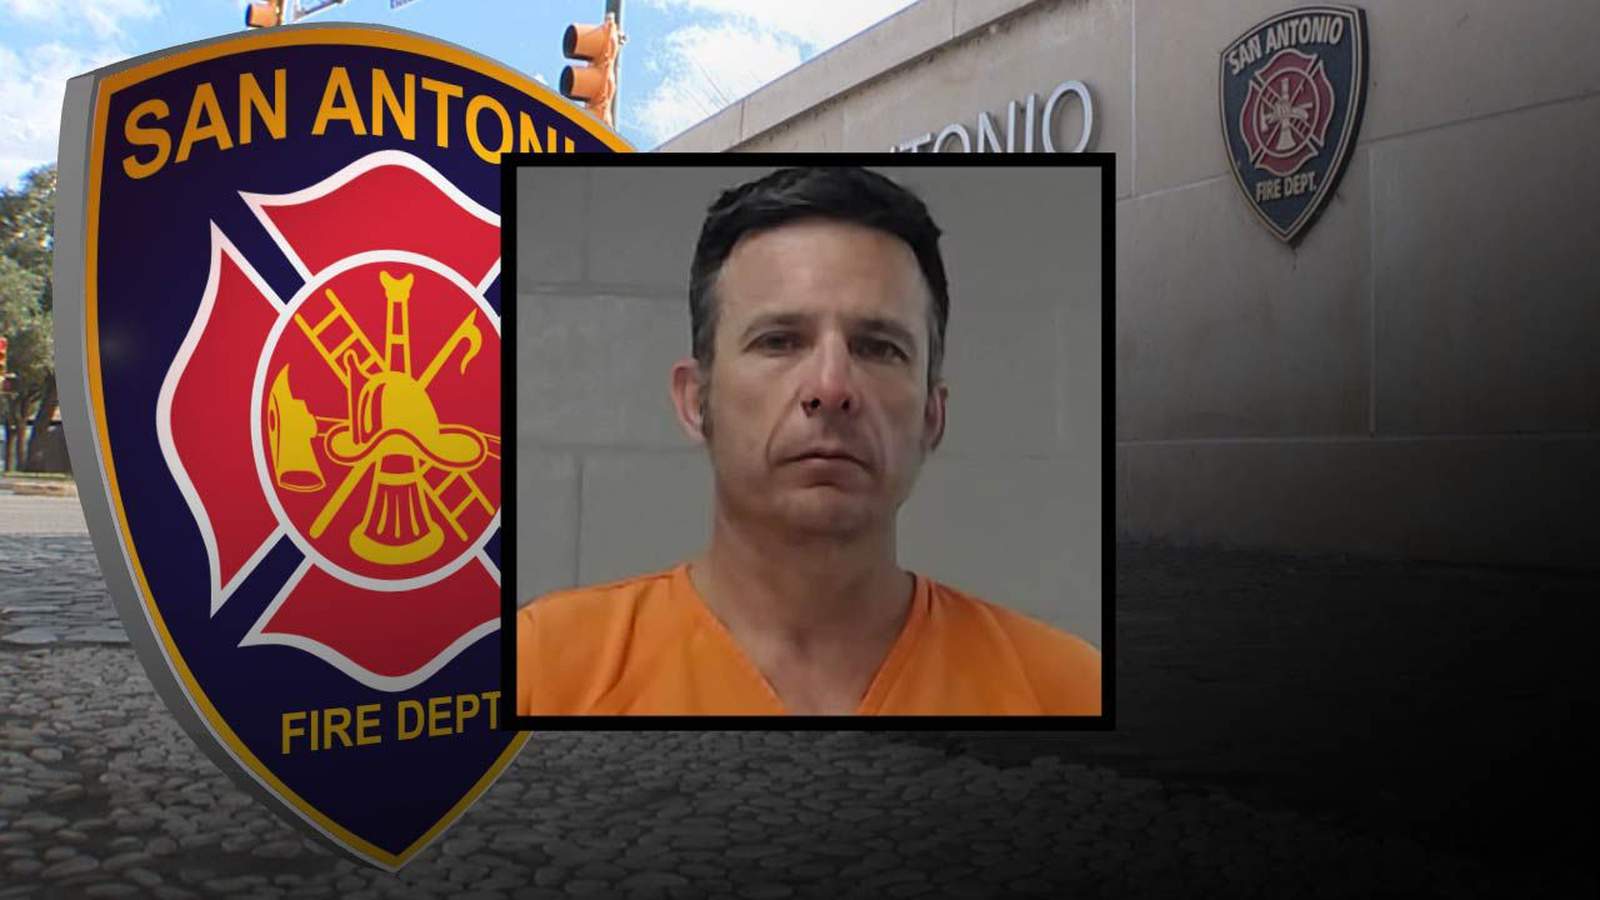 SAFD policy allowed firefighter to continue working, eventually retire with a pension after attacking girlfriend